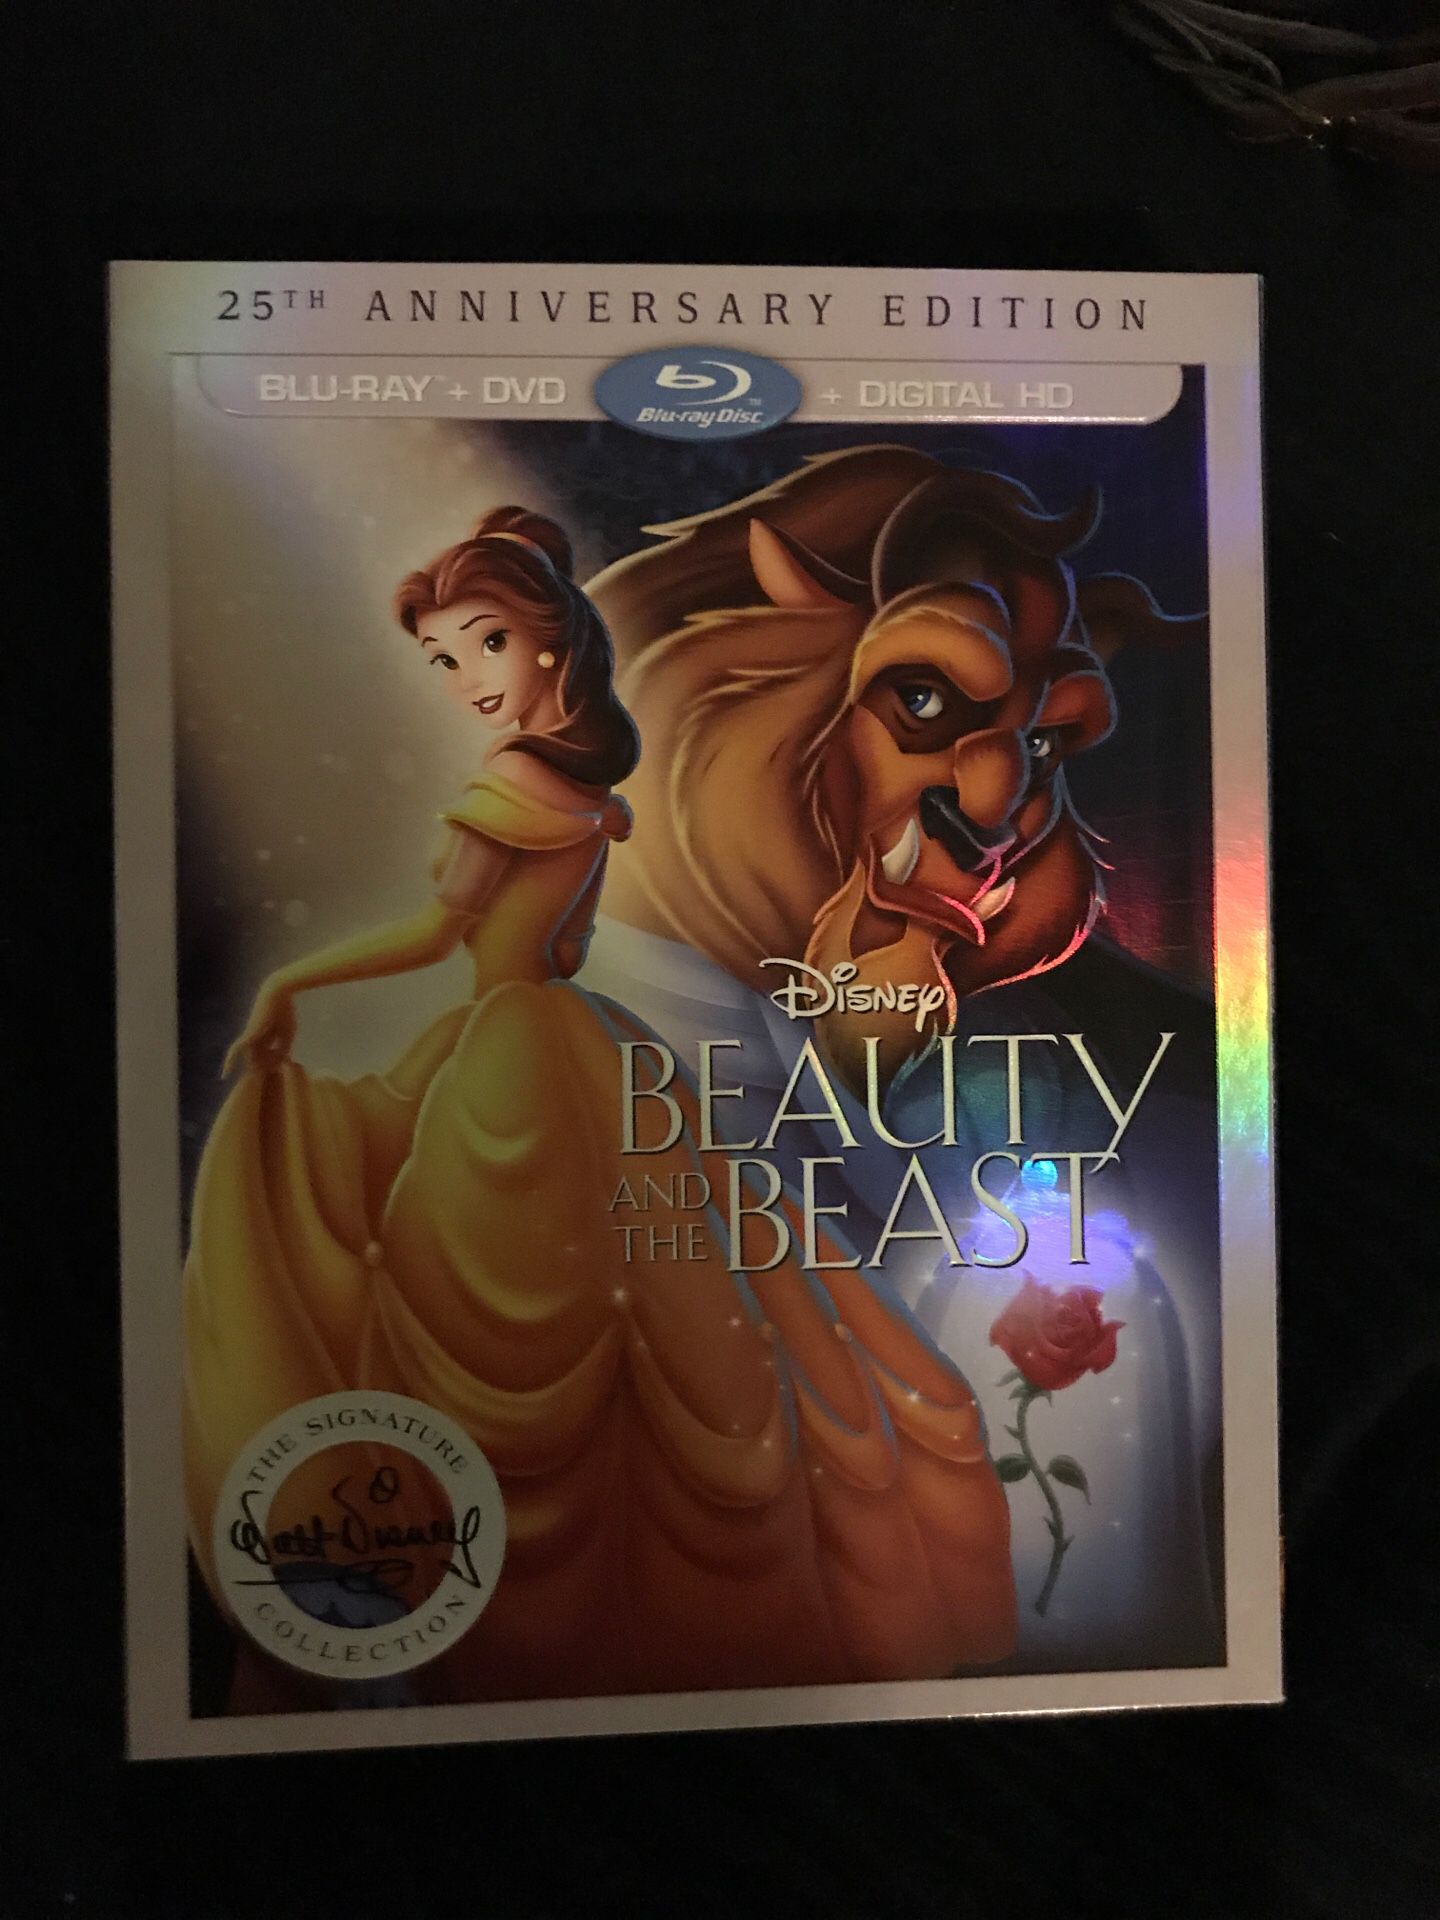 Beauty and the Beast Blu-ray/DVD BRAND NEW